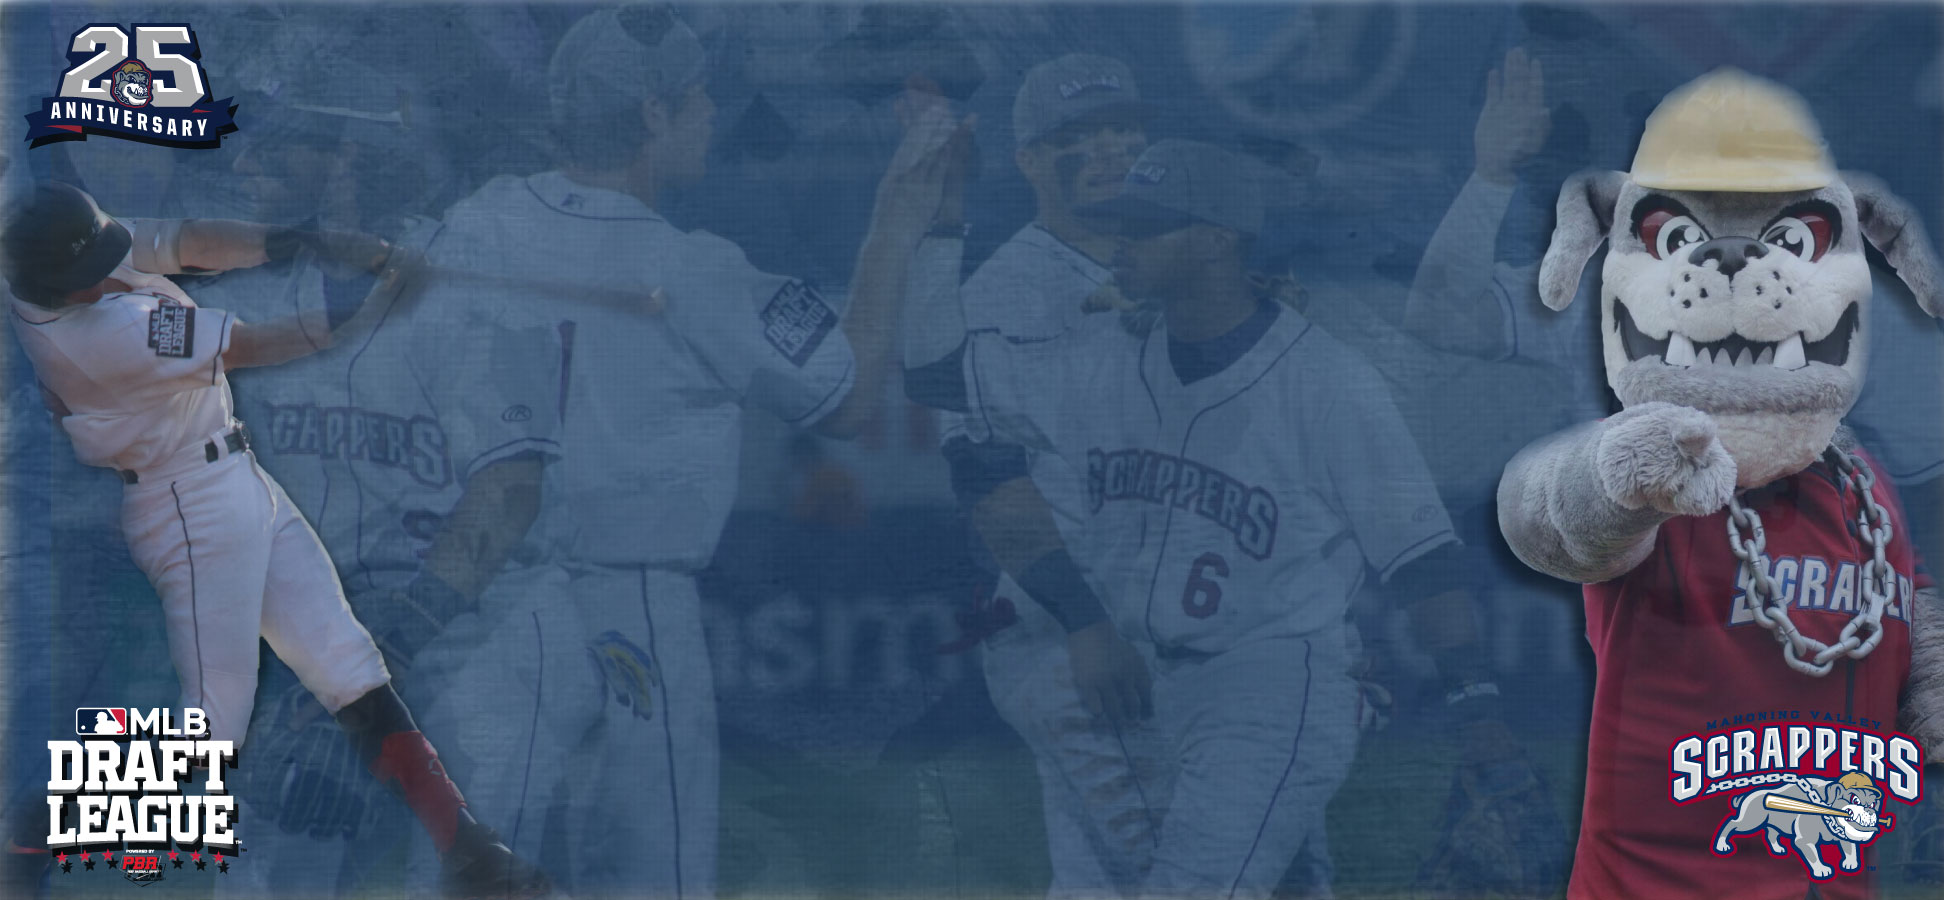 Fernandez and Williams Selected for MLB Draft League Rosters - Nova  Southeastern University Athletics